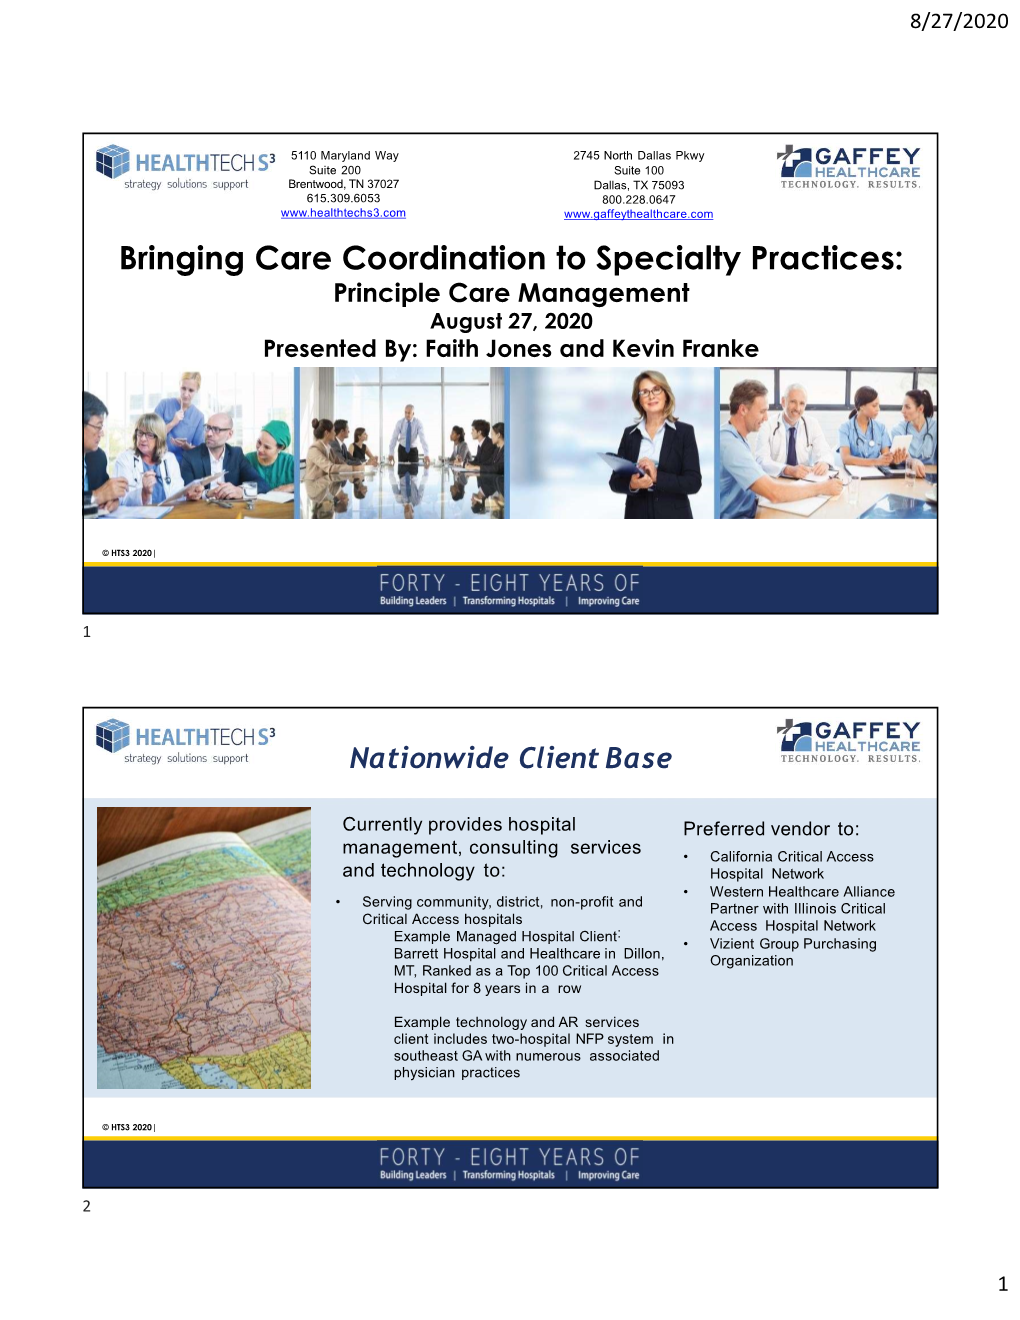 Bringing Care Coordination to Specialty Practices: Principle Care Management August 27, 2020 Presented By: Faith Jones and Kevin Franke